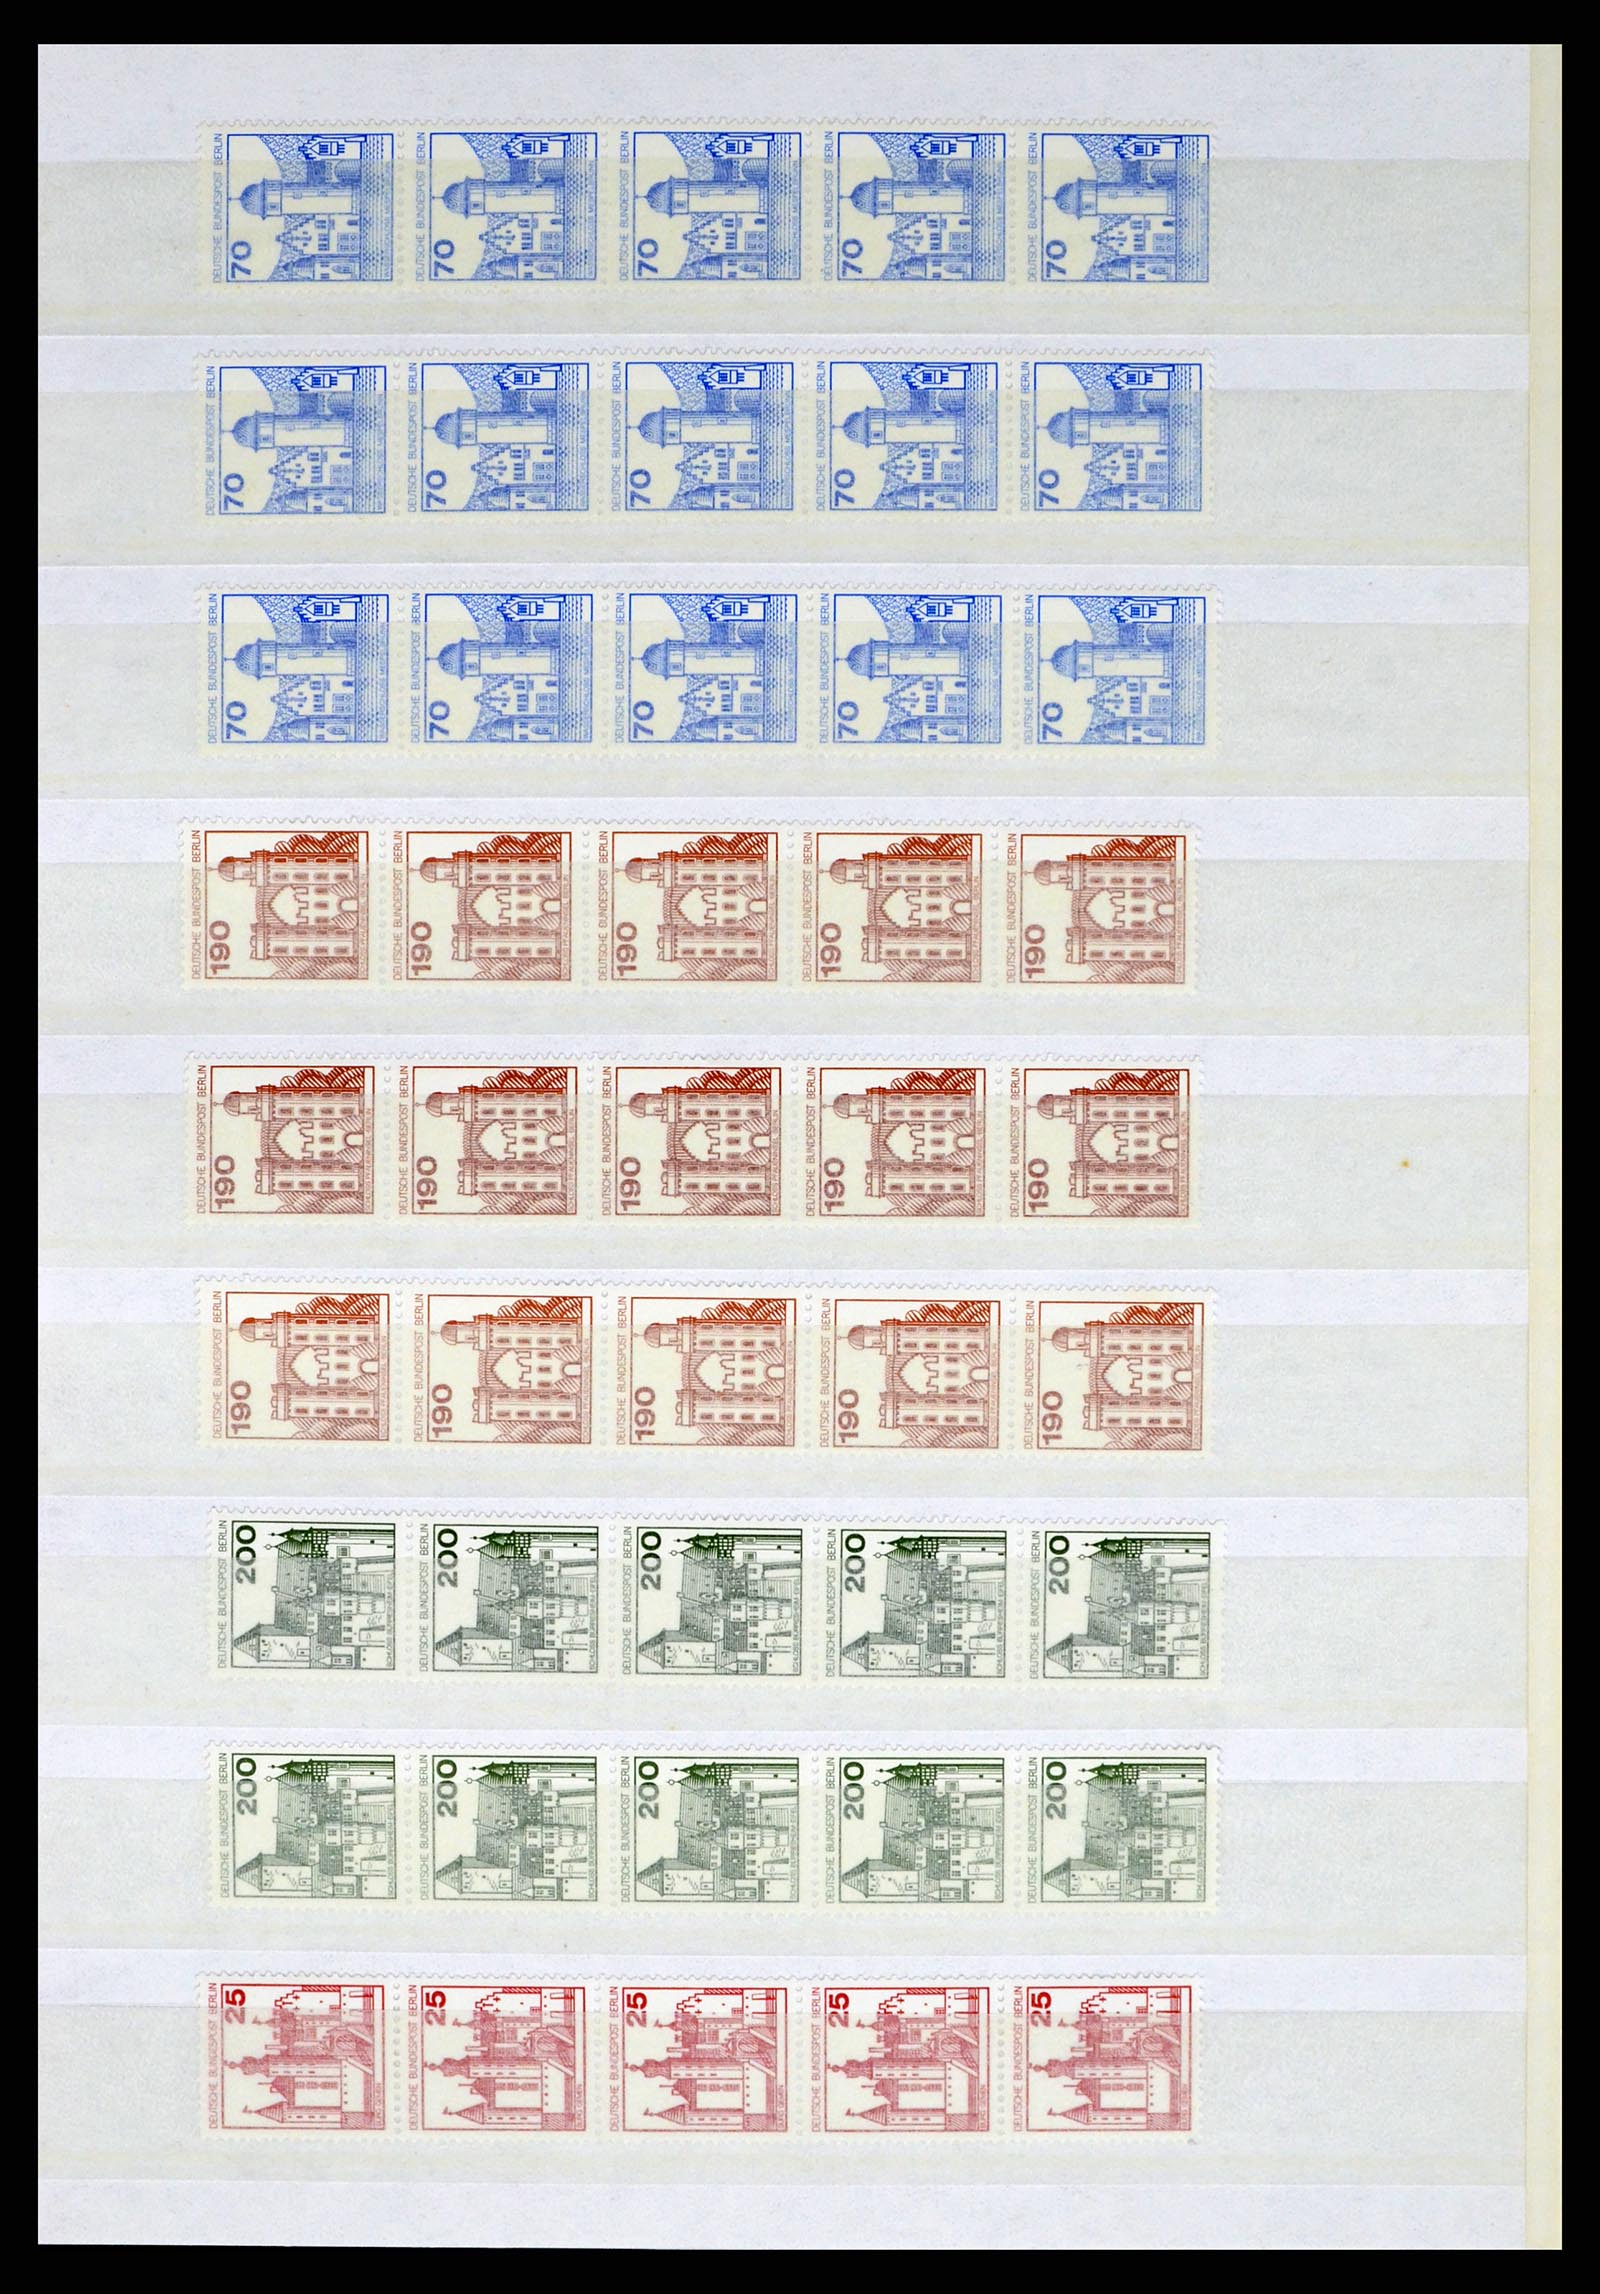 37354 092 - Stamp collection 37354 Bundespost and Berlin 1955-2000.